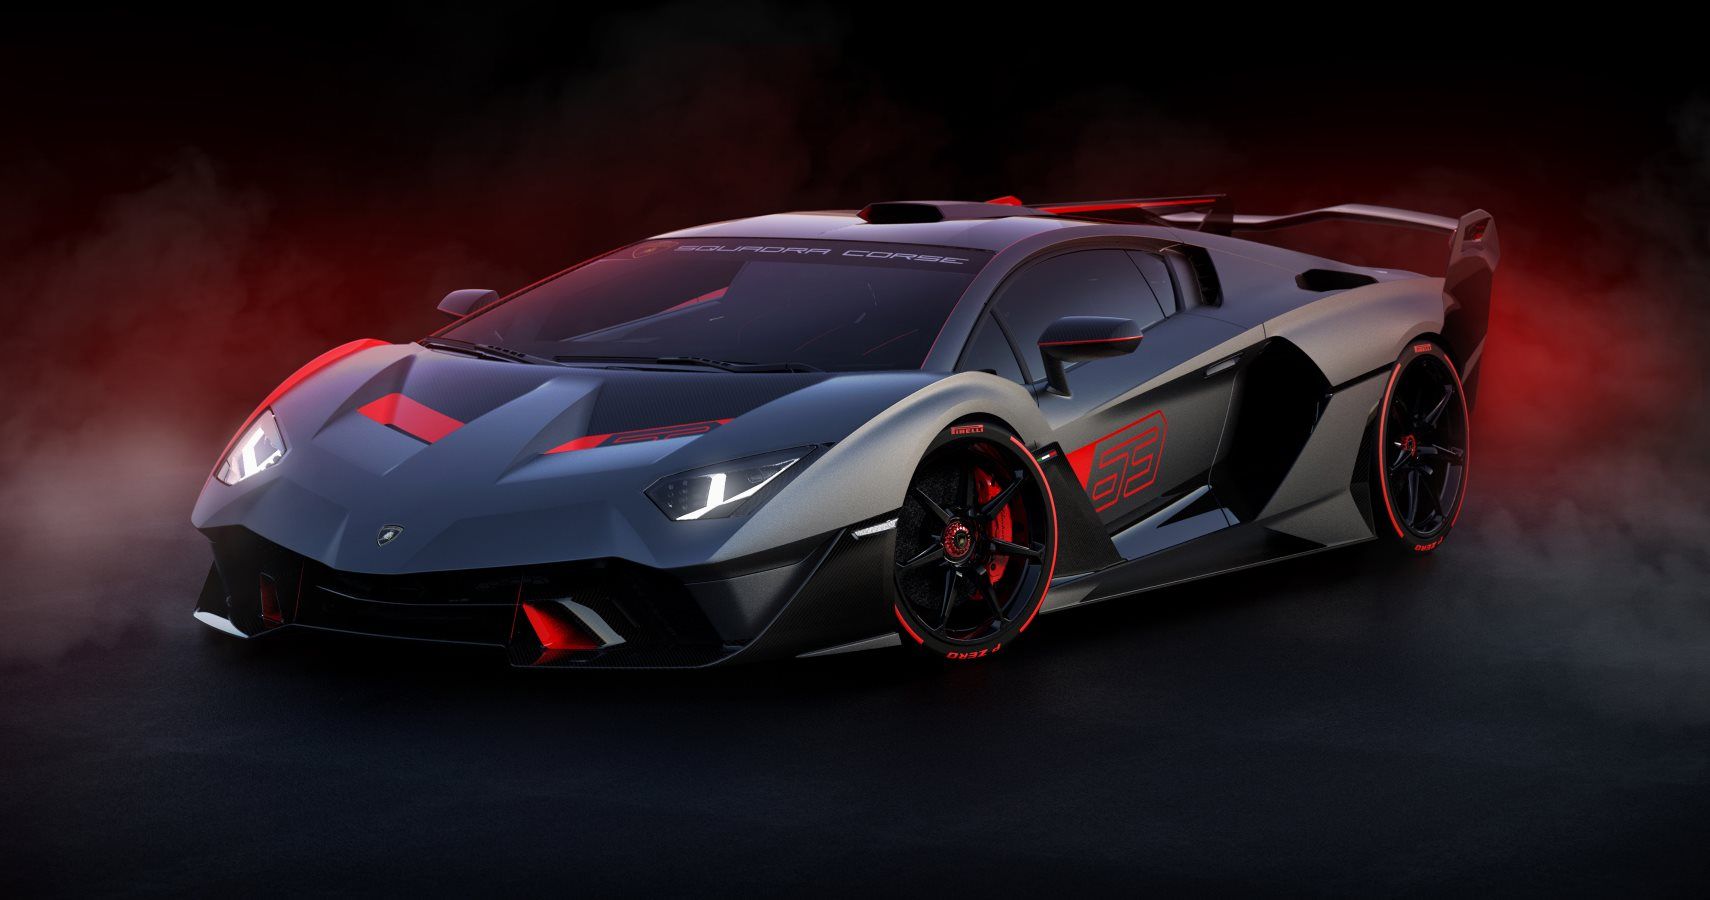 Lamborghini SC18: Check Out This One Of A Kind Aventador